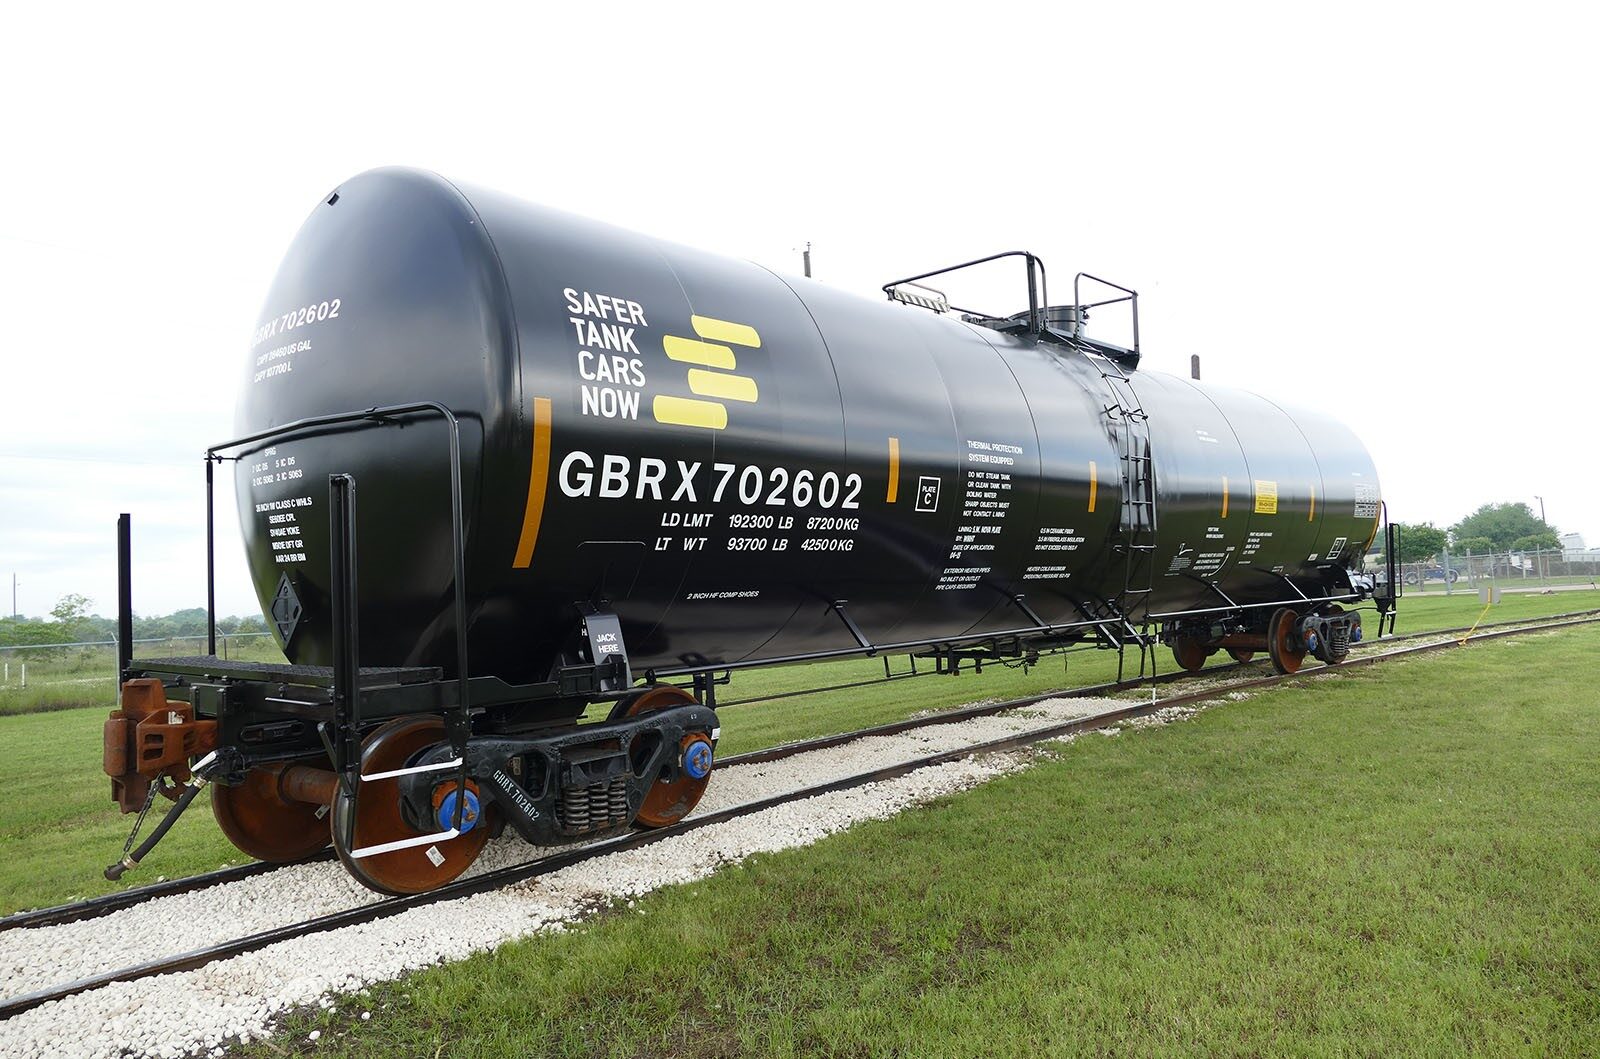 A National Steel Car tank compliant with the DOT-117 safety standard